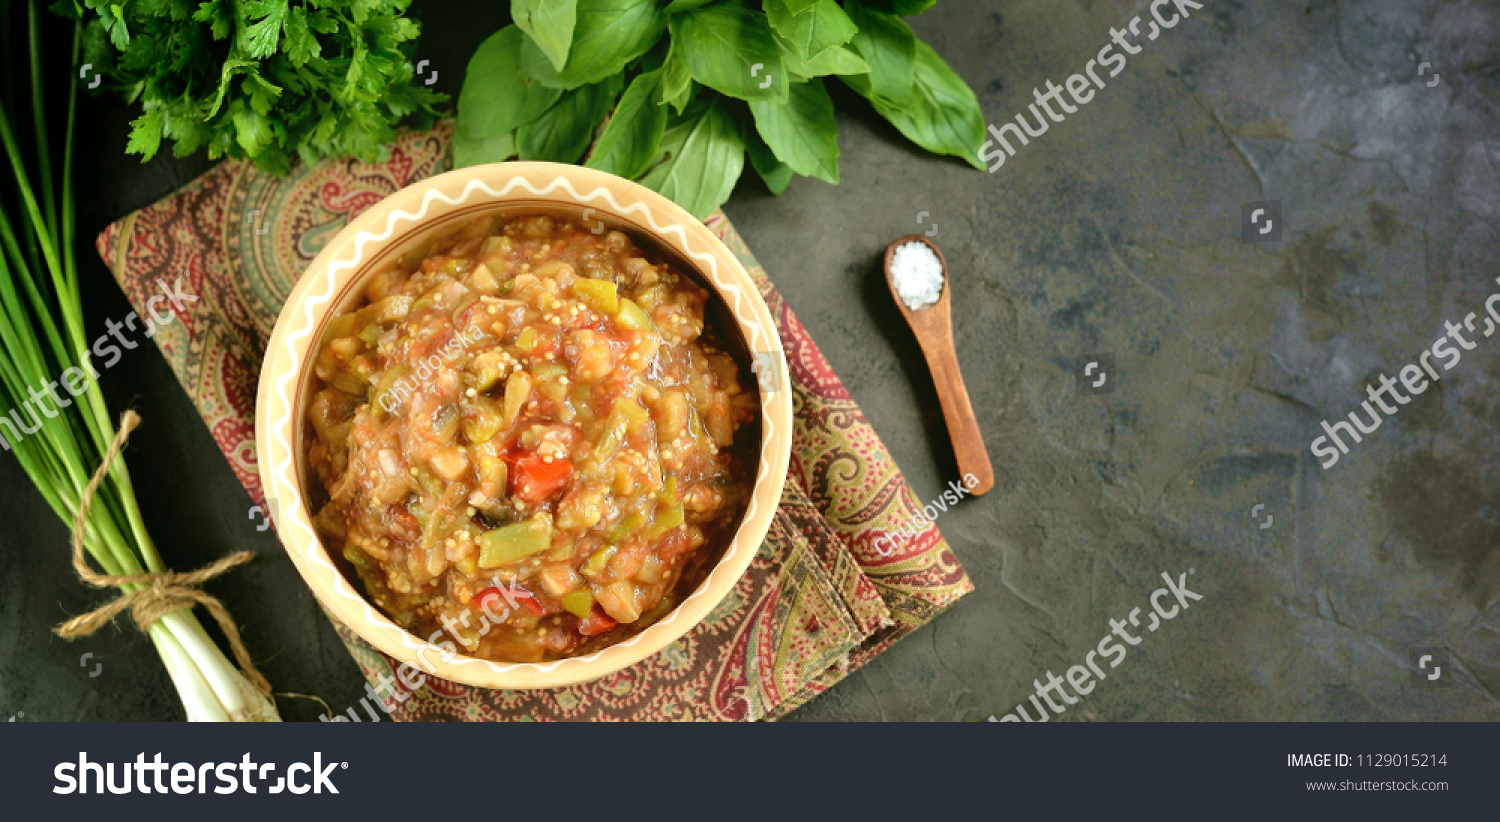 Middle Eastern cuisine - babaganush (eggplant caviar) from baked eggplant and pepper, with tomatoes, chili pepper, onion with olive oil and sea salt. #1129015214